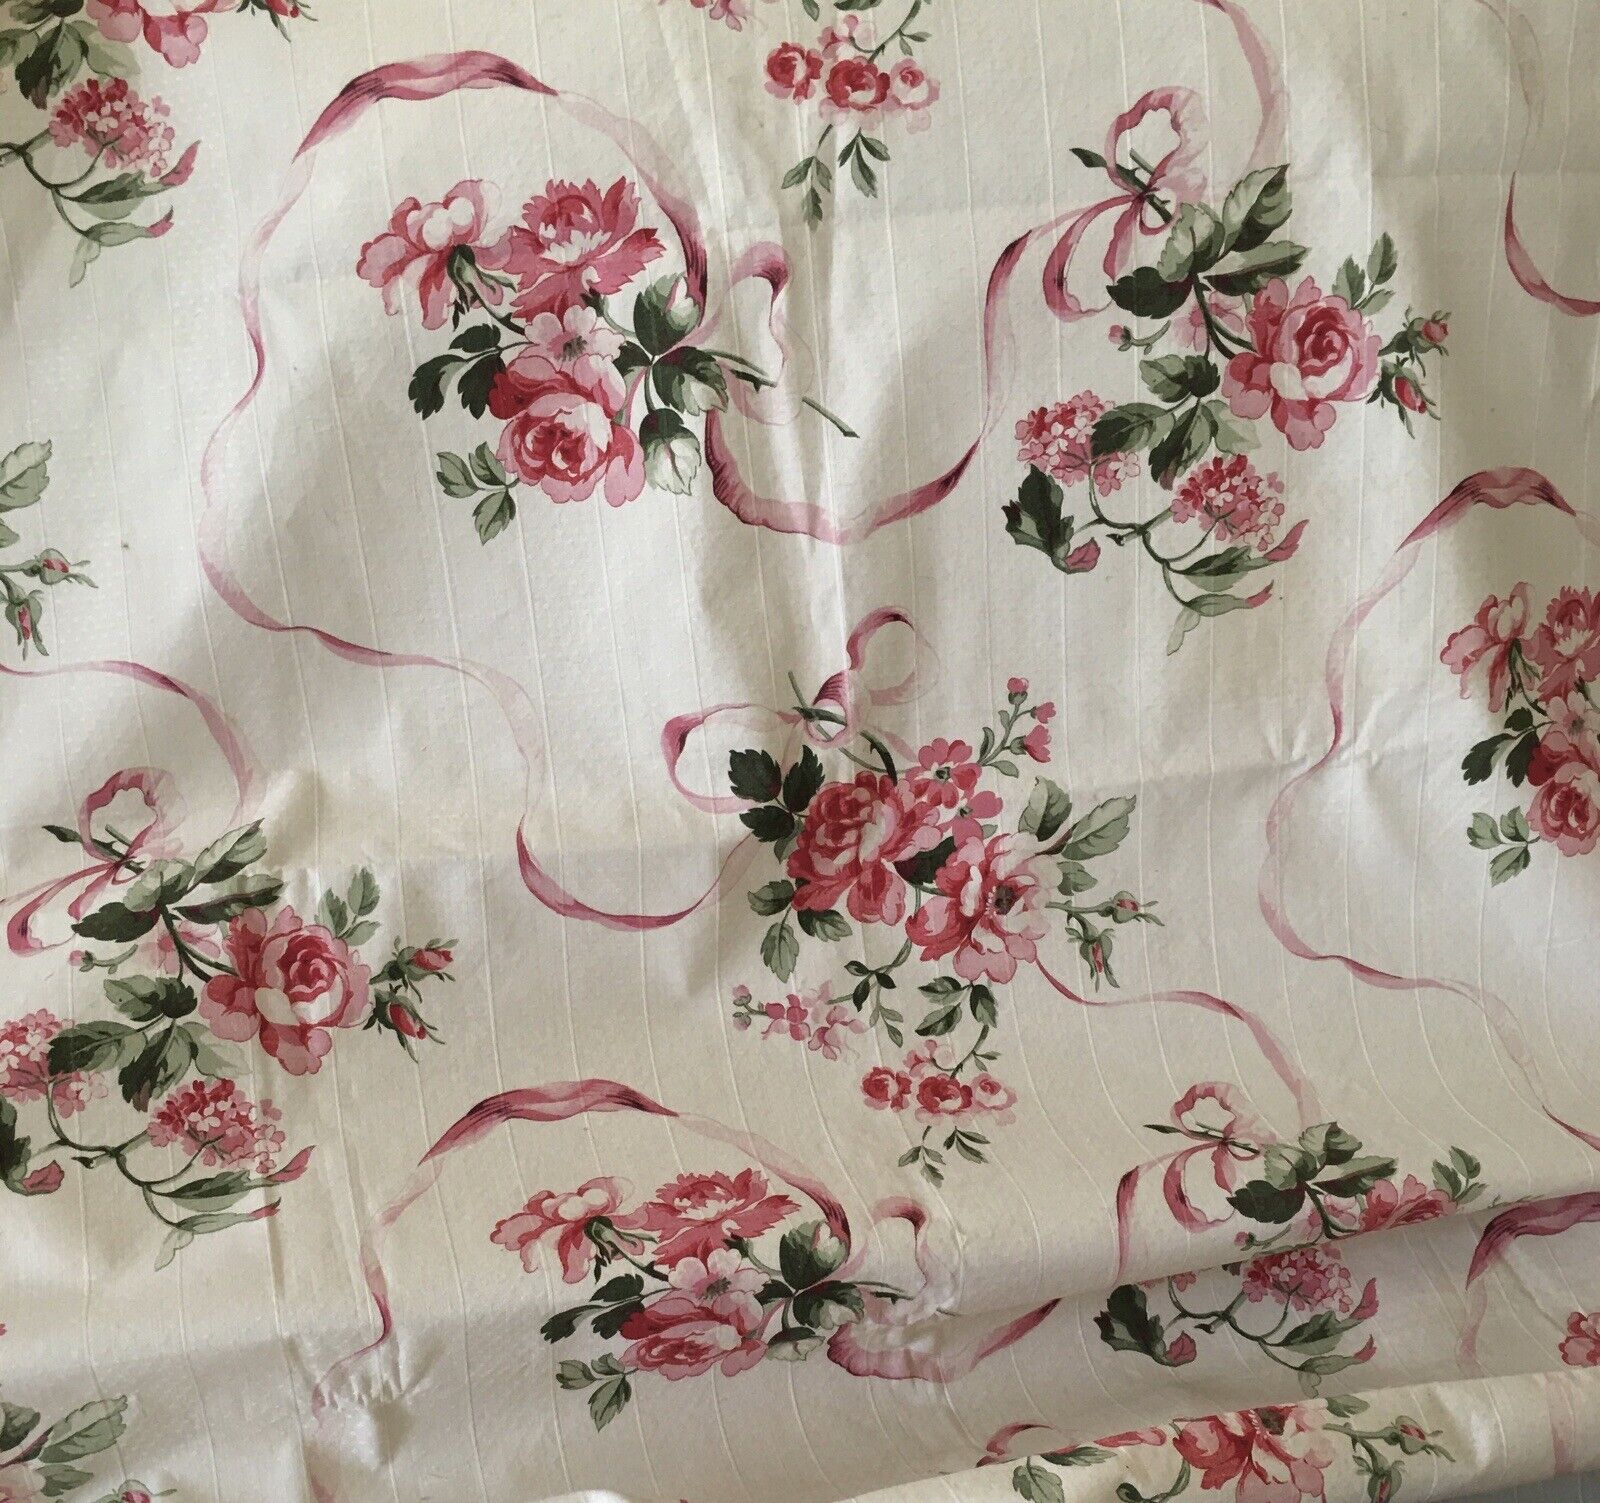 Gorgeous  19thc Antique French Floral Roses Ribbon Garland Cotton Fabric ~ Pink